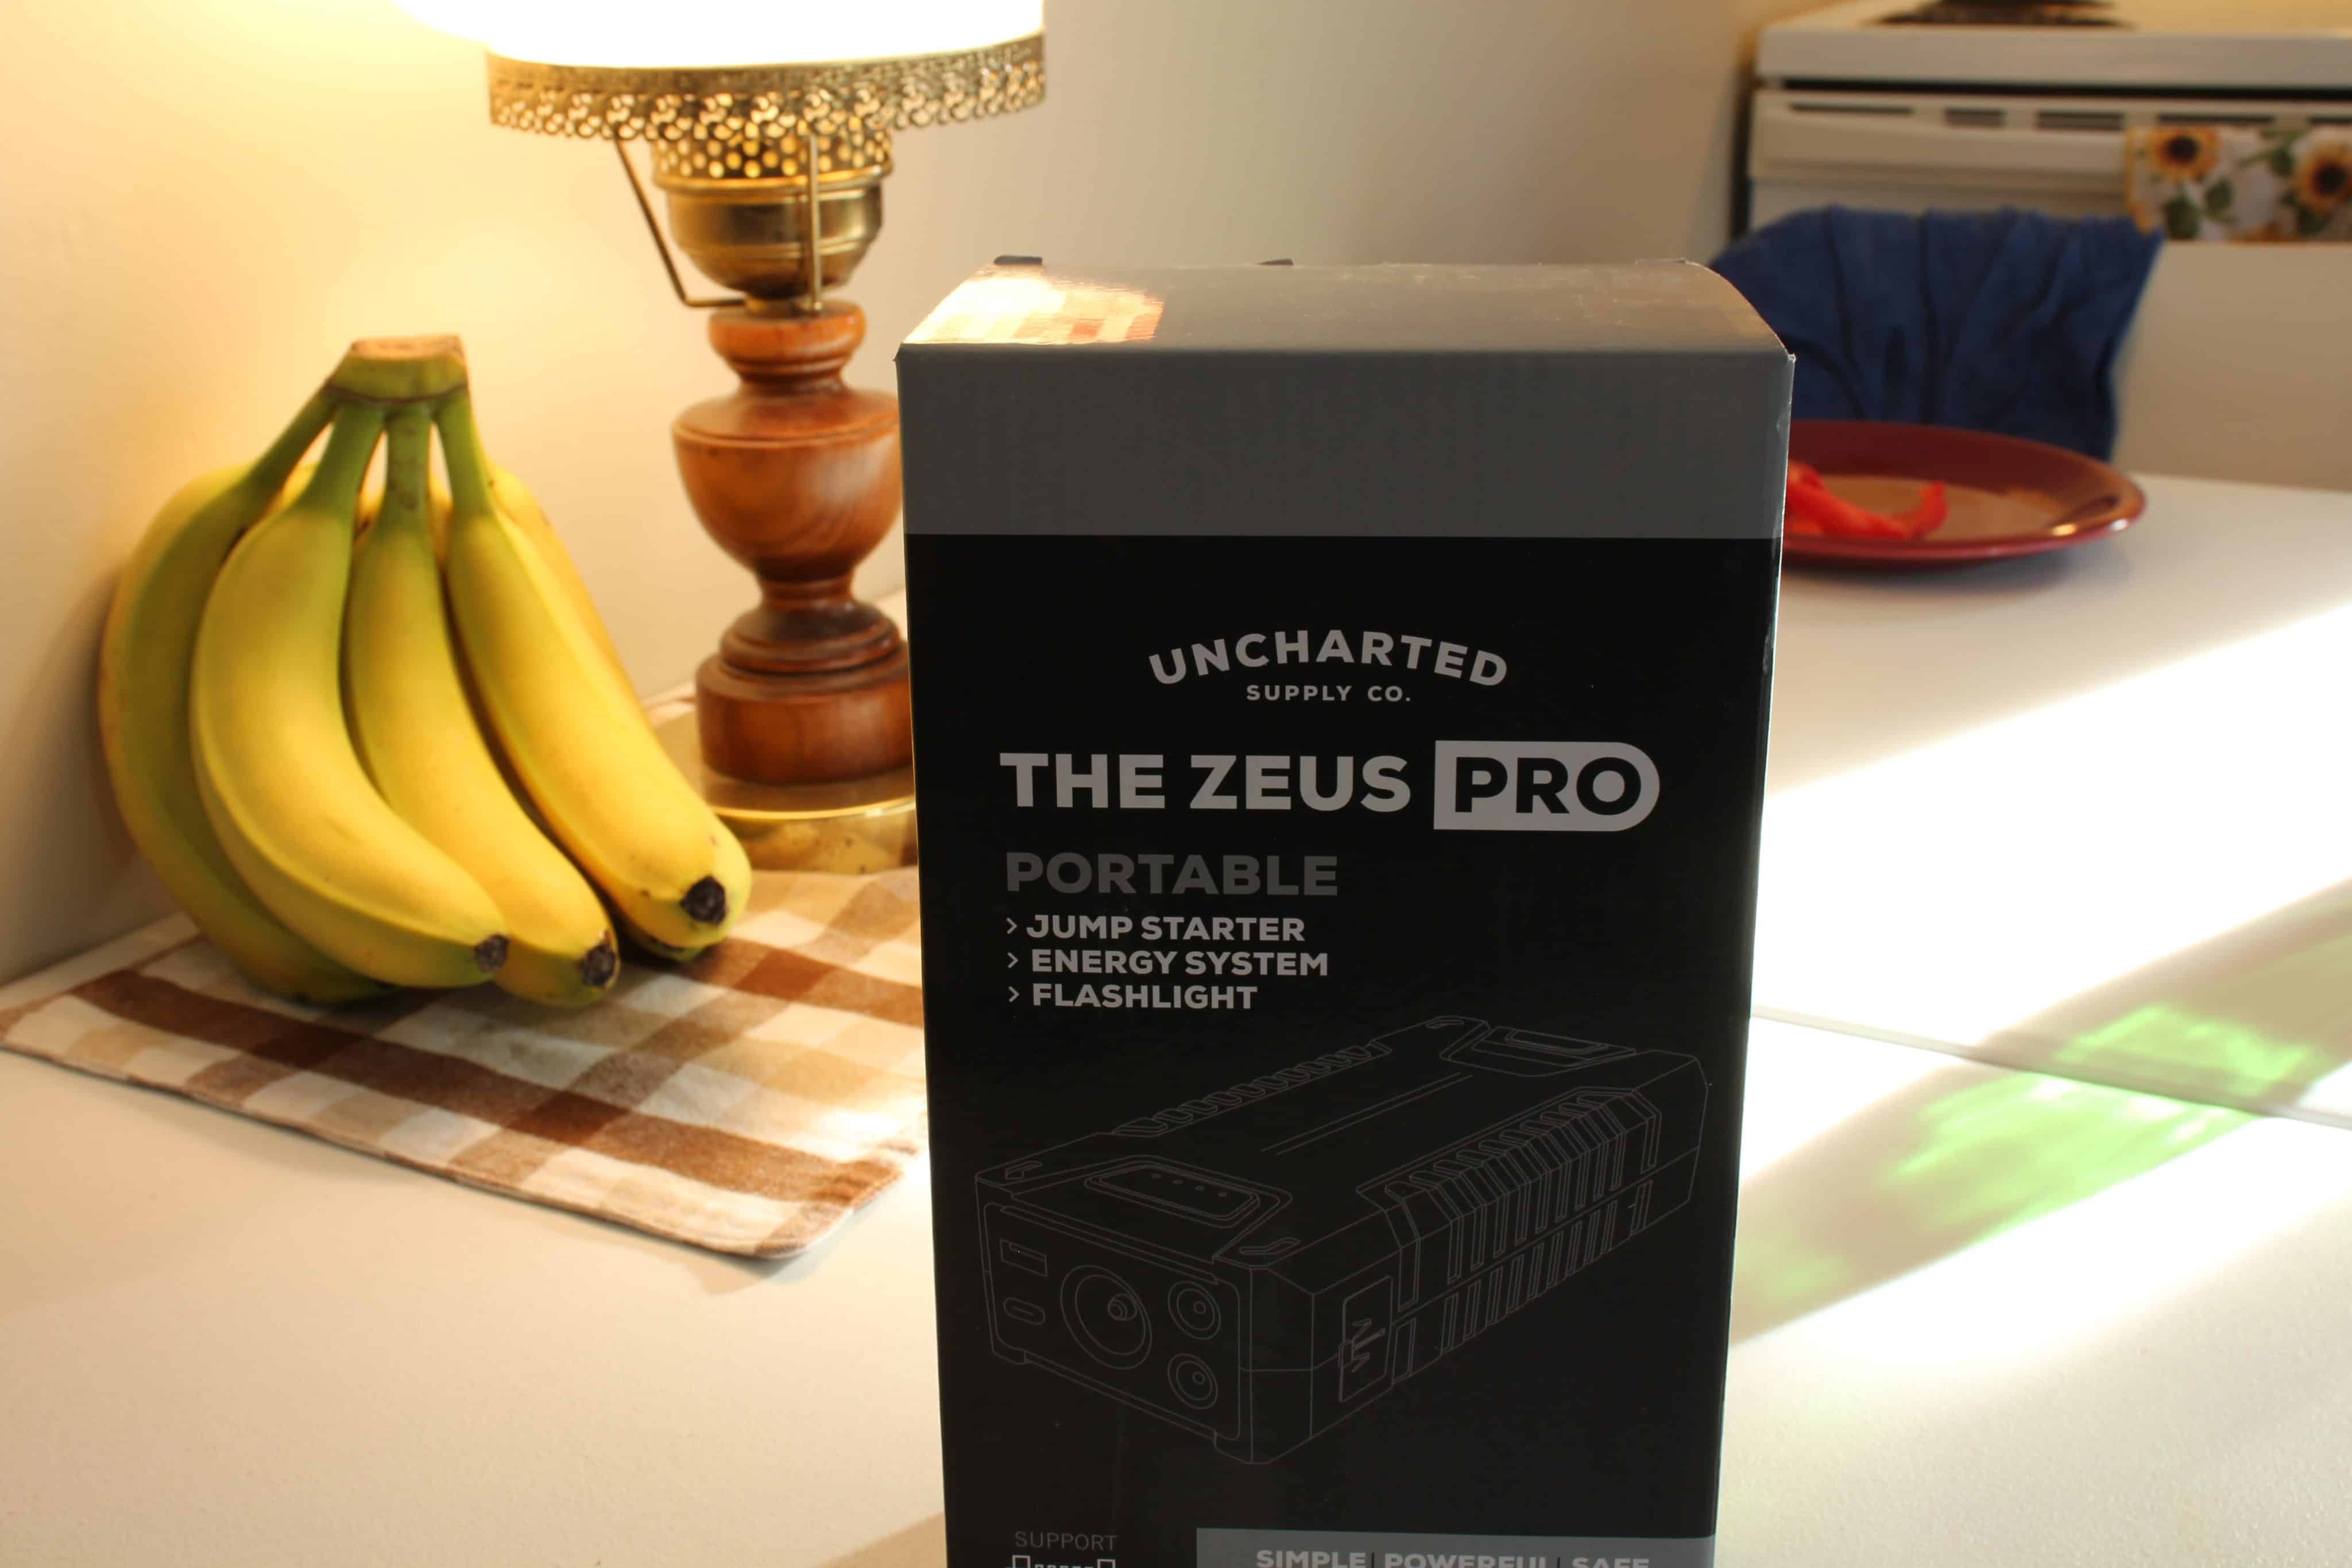 The Zeus Pro - Uncharted Supply Co